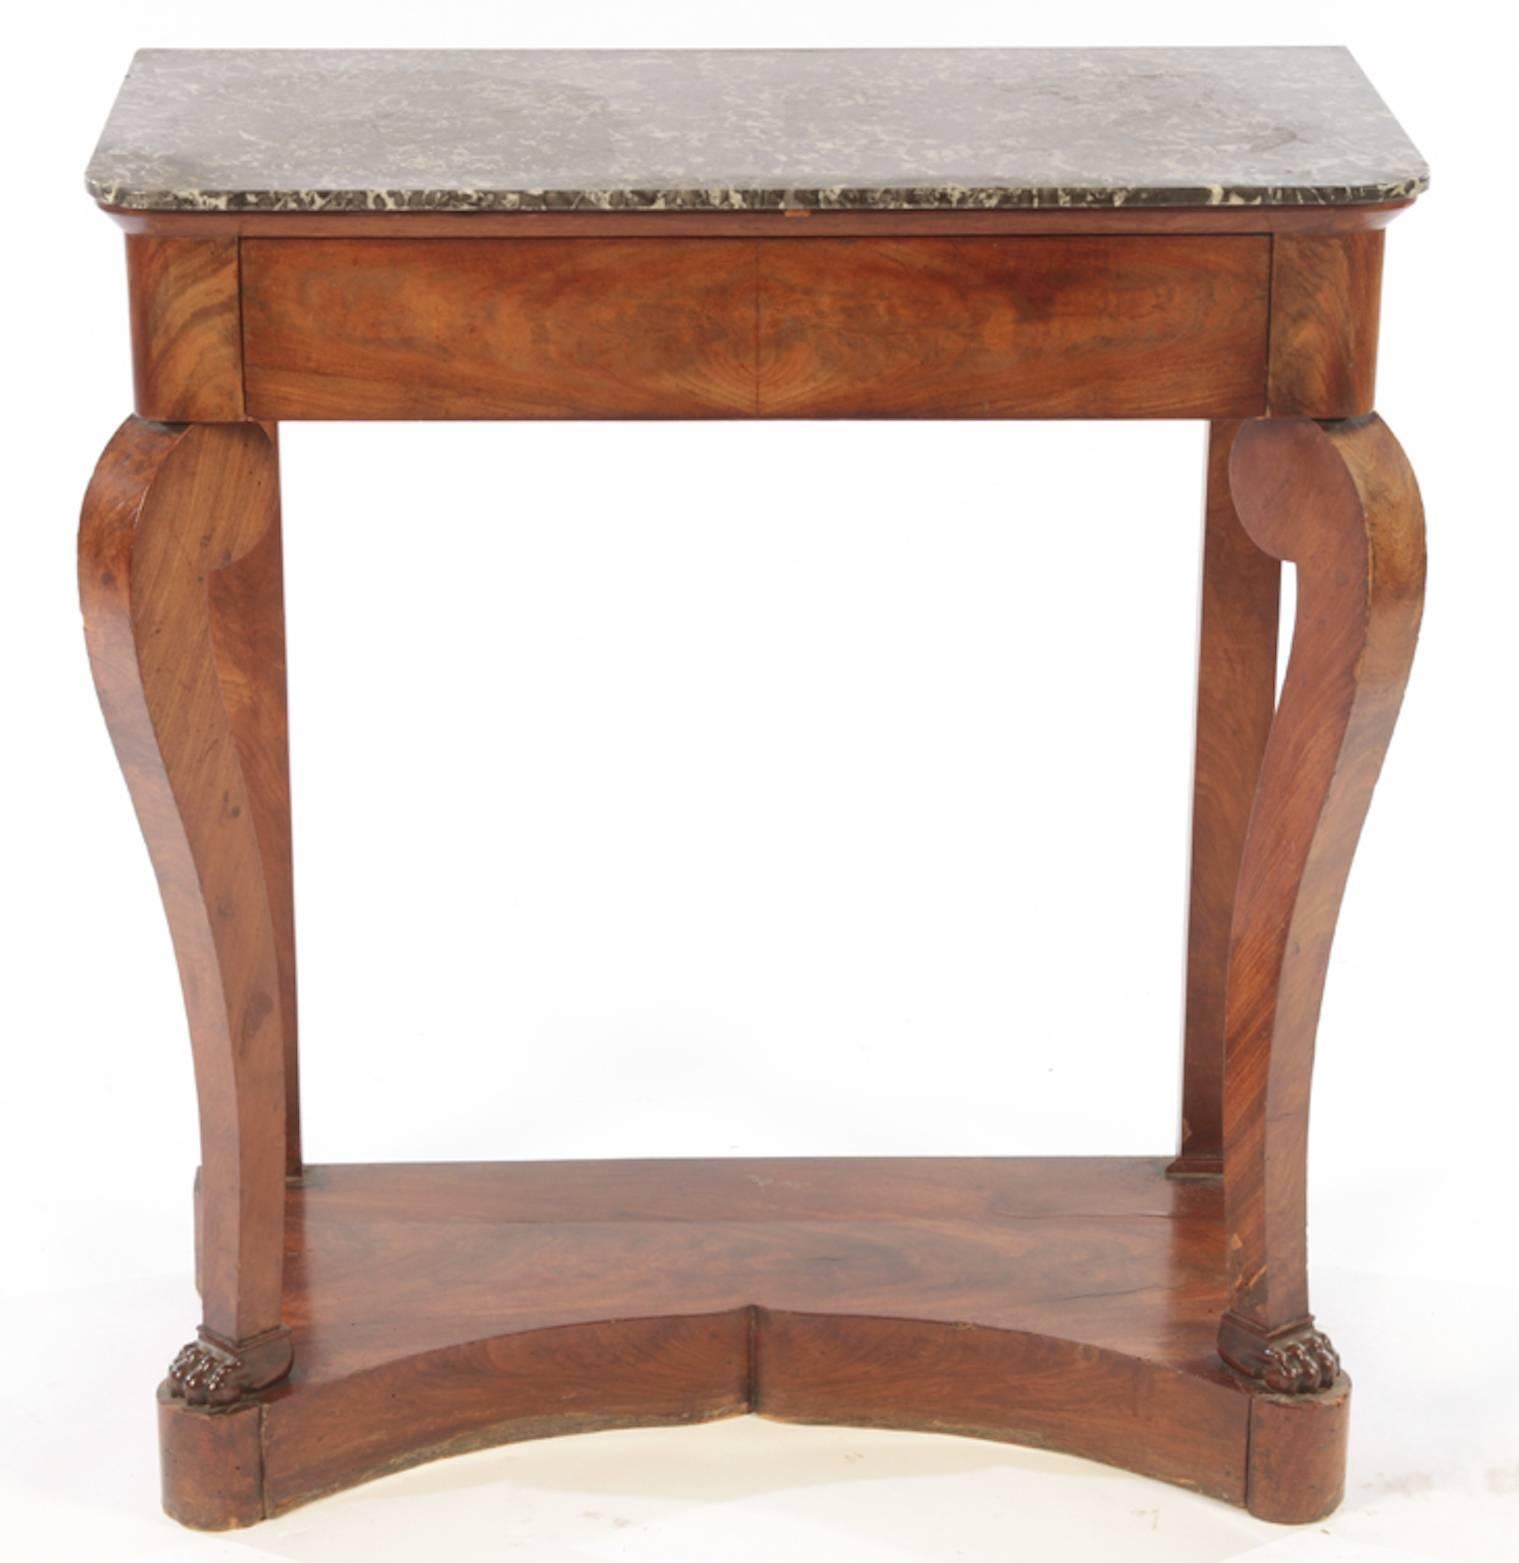 French mahogany Louis Philippe console table with marble top, one drawer.